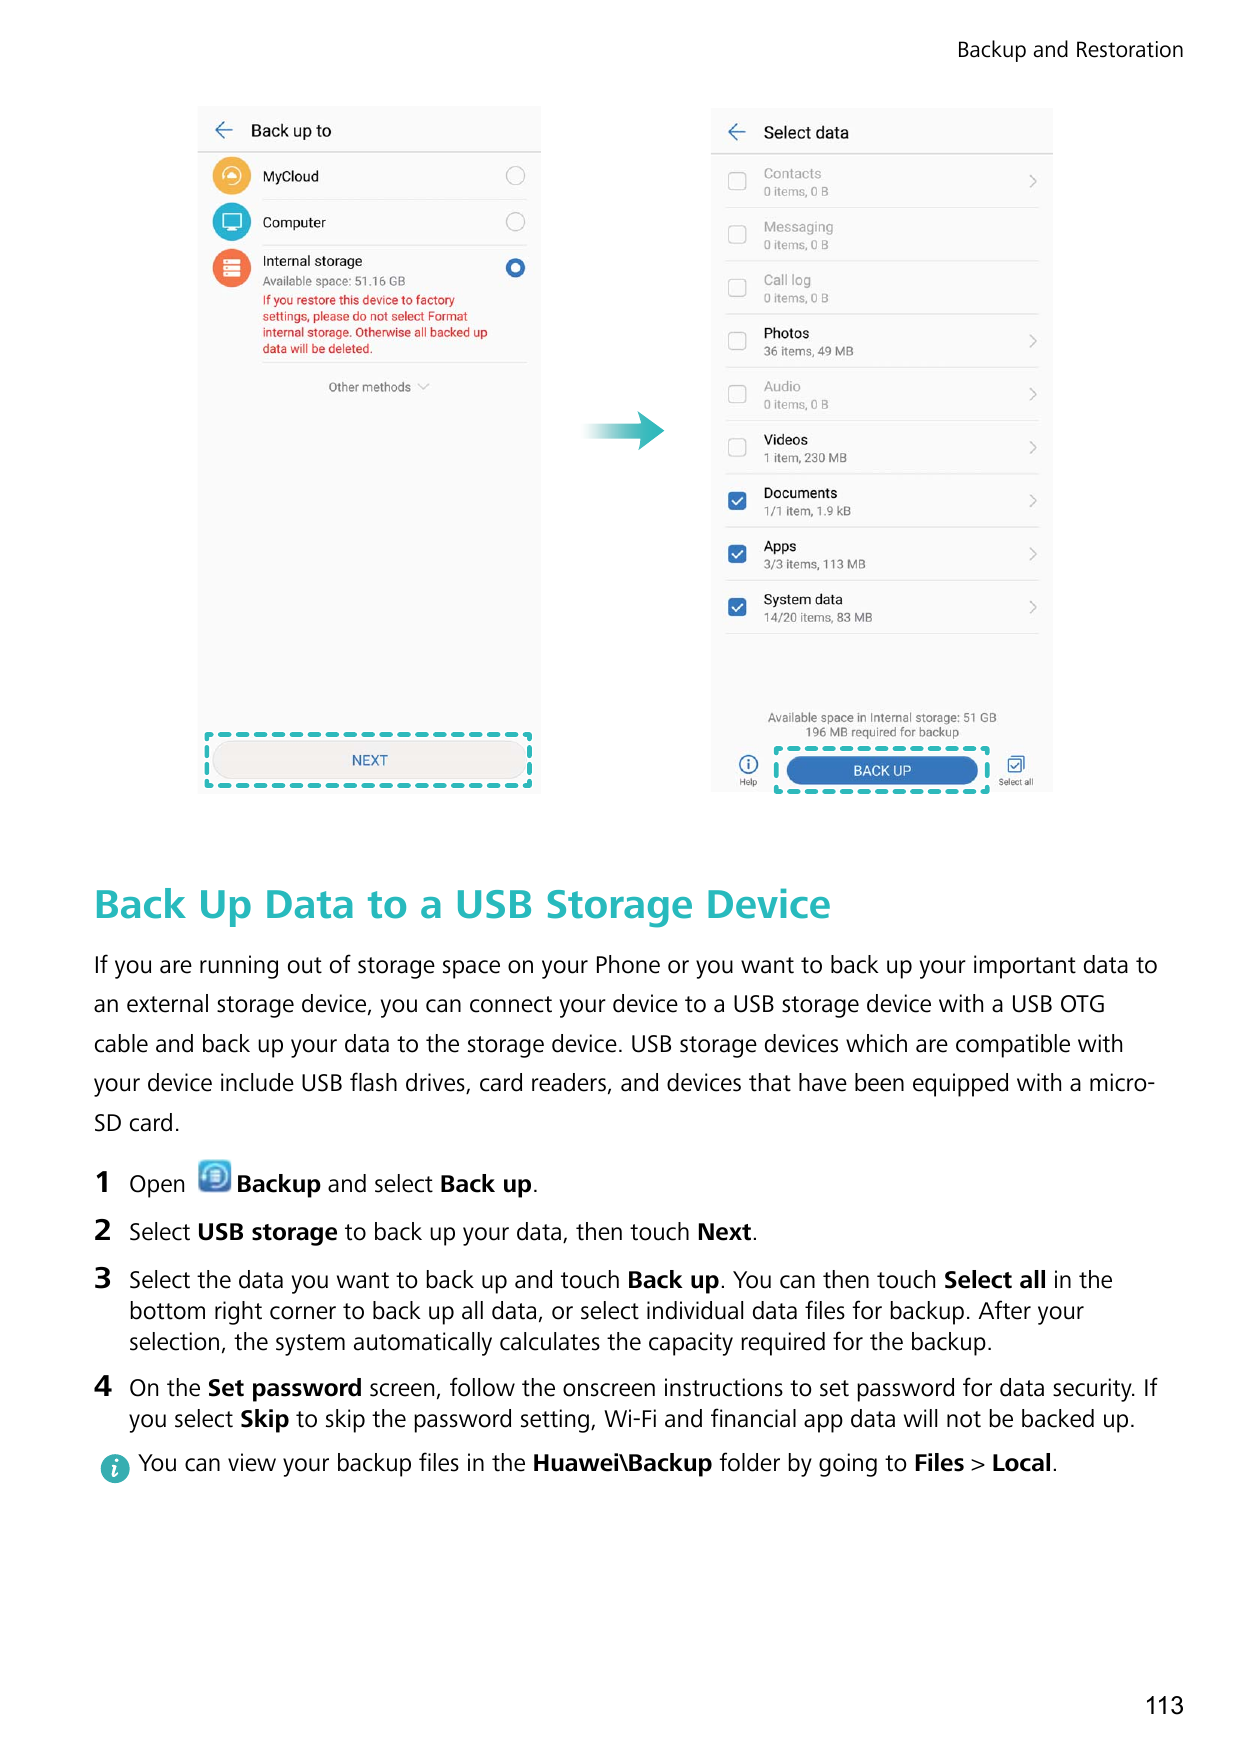 Backup and RestorationBack Up Data to a USB Storage DeviceIf you are running out of storage space on your Phone or you want to b